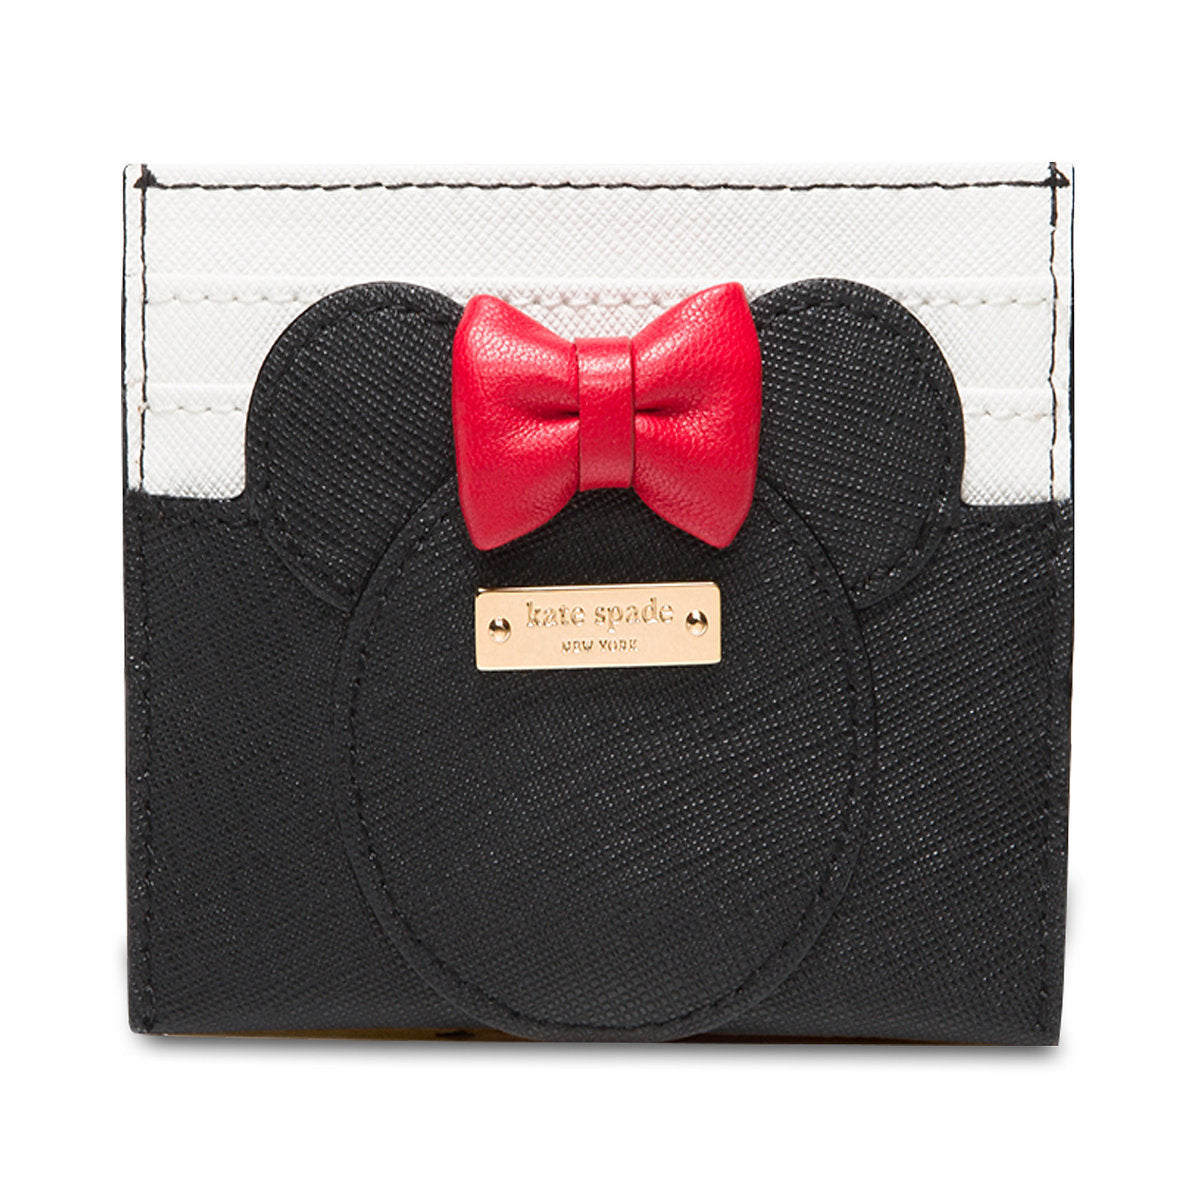 Disney Minnie Mouse Card Case by Kate Spade New York New with Tags